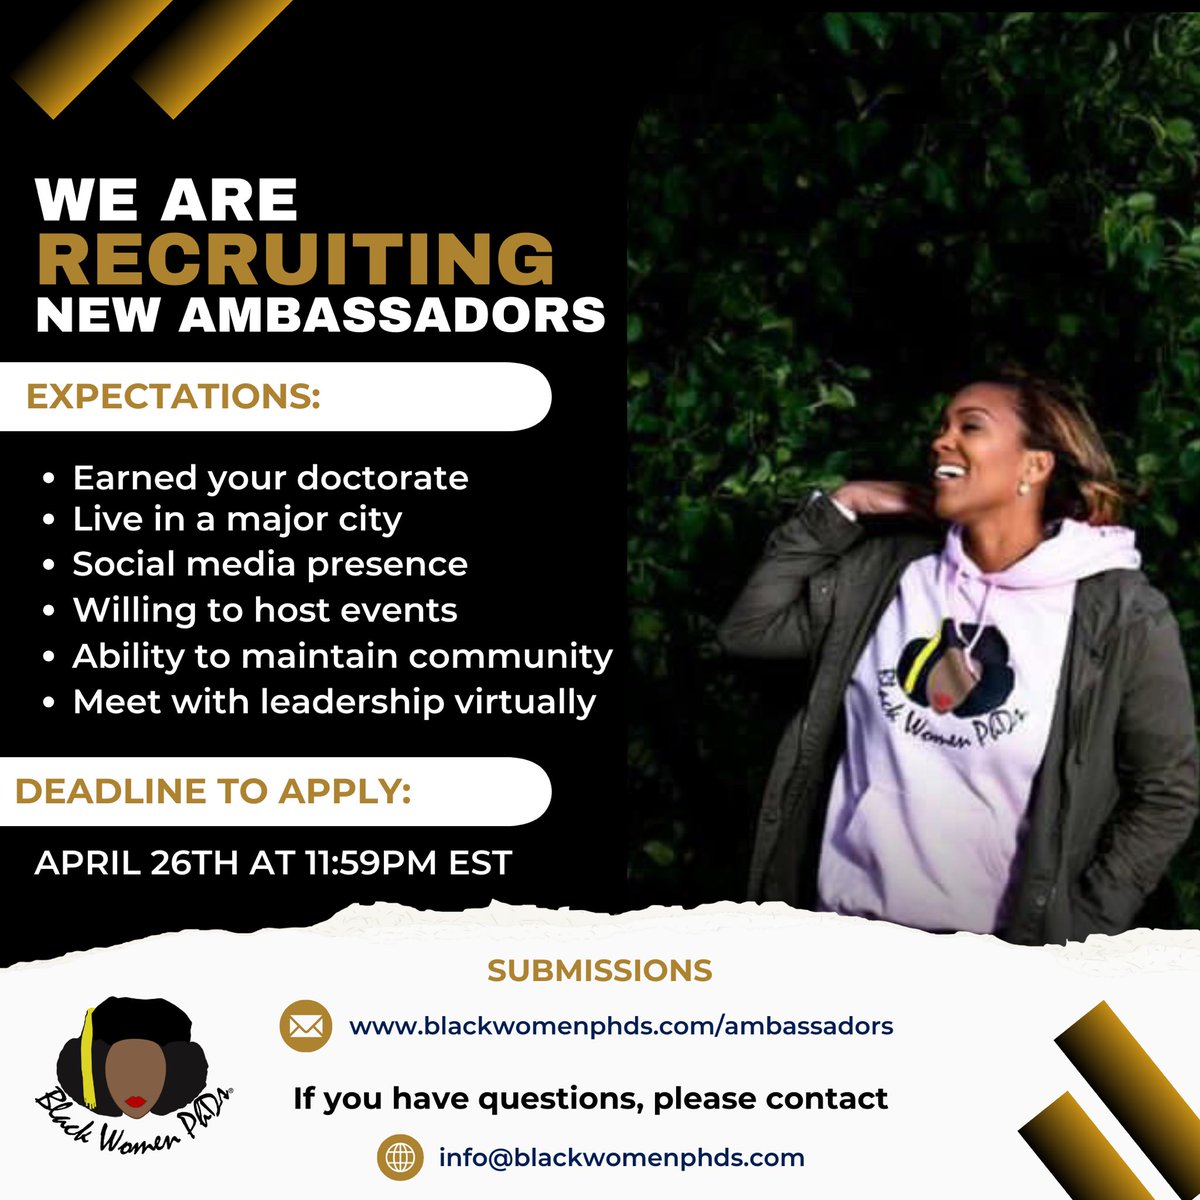 𝐂𝐀𝐋𝐋 𝐅𝐎𝐑 𝐆𝐋𝐎𝐁𝐀𝐋 𝐀𝐌𝐁𝐀𝐒𝐒𝐀𝐃𝐎𝐑𝐒! ⁣ If you’re interested in a volunteer opportunity, to be more active within the #BlackWomenPhDs ®️ community, consider becoming an ambassador. ⁣ ⁣ Apply by April 26 @ 11:59EST!⁣ ⁣ blackwomenphds.com/ambassadors ⁣ #blackwomenphds